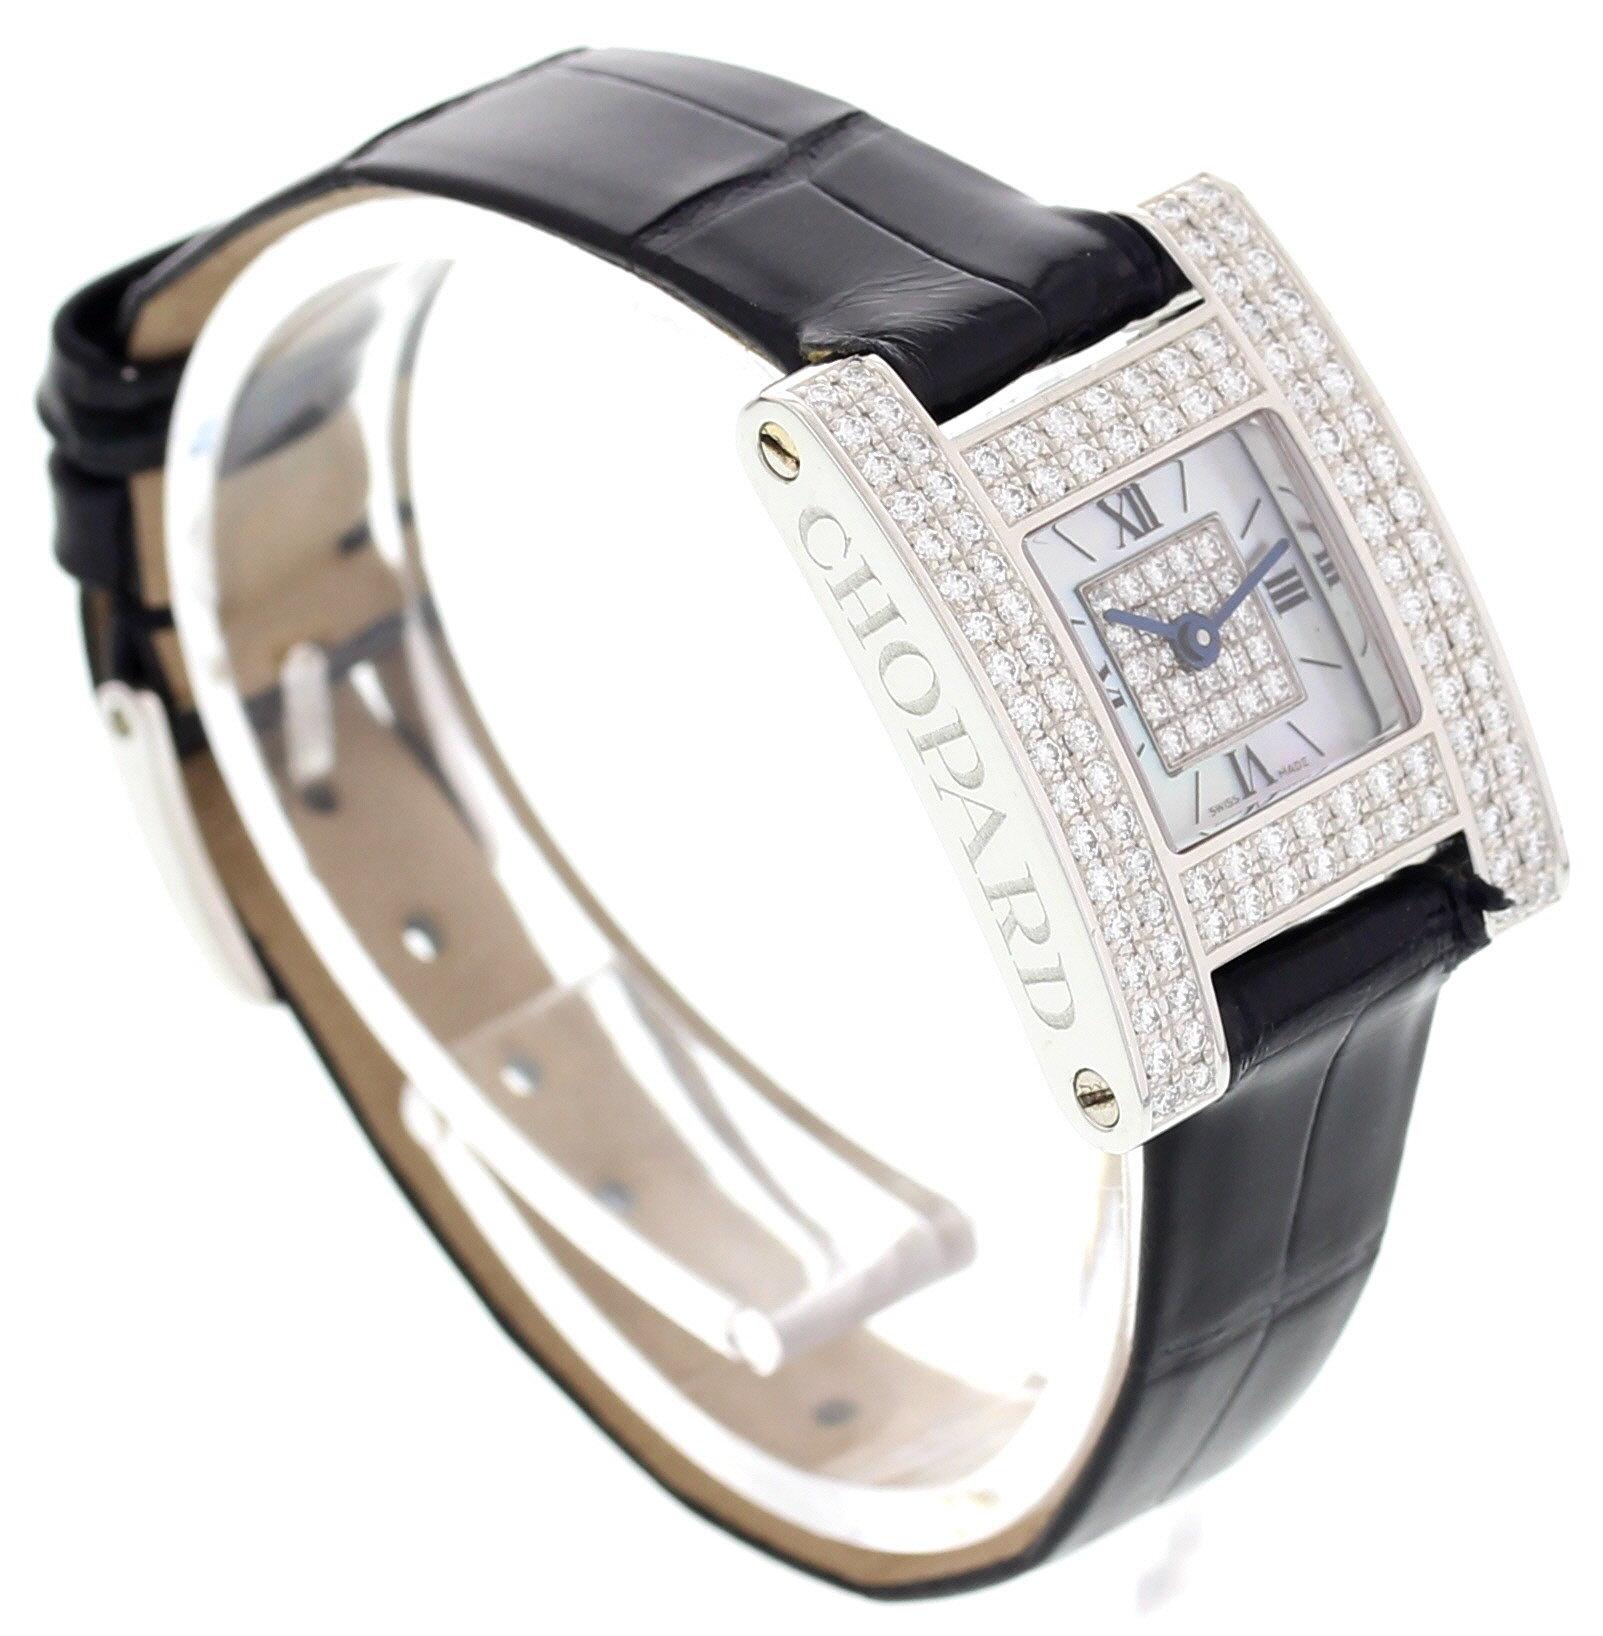 Ladies Chopard a Ladies Fine 18 Karat White Gold Diamond Watch 493 1 In Excellent Condition For Sale In New York, NY